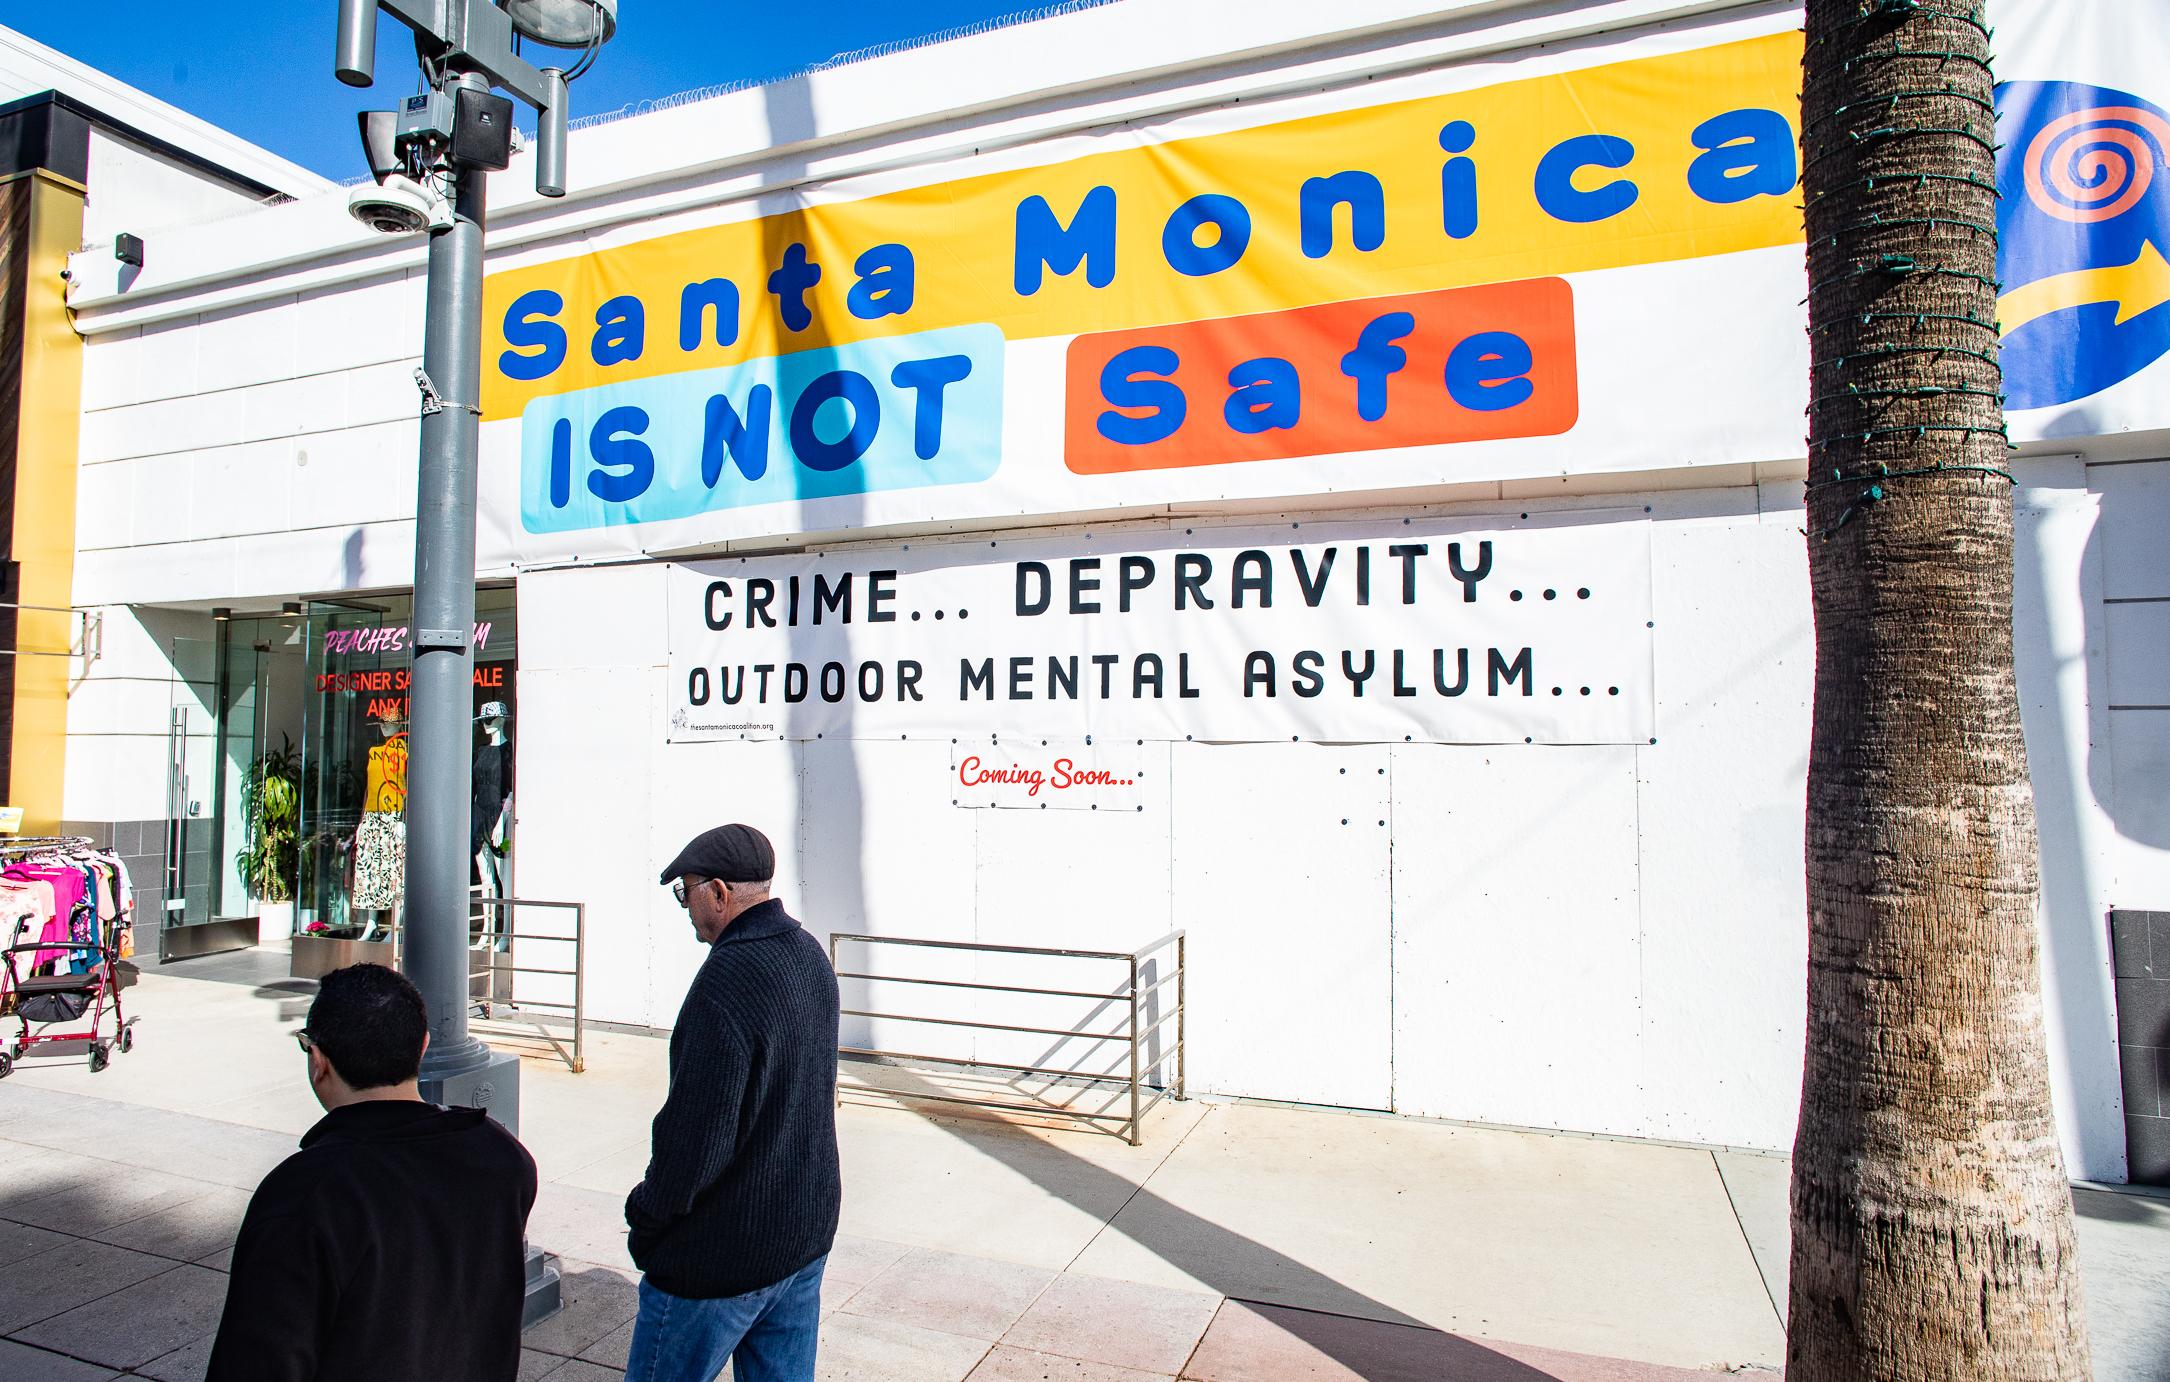 6-Year-Old Girl Attacked by Homeless Man in Santa Monica